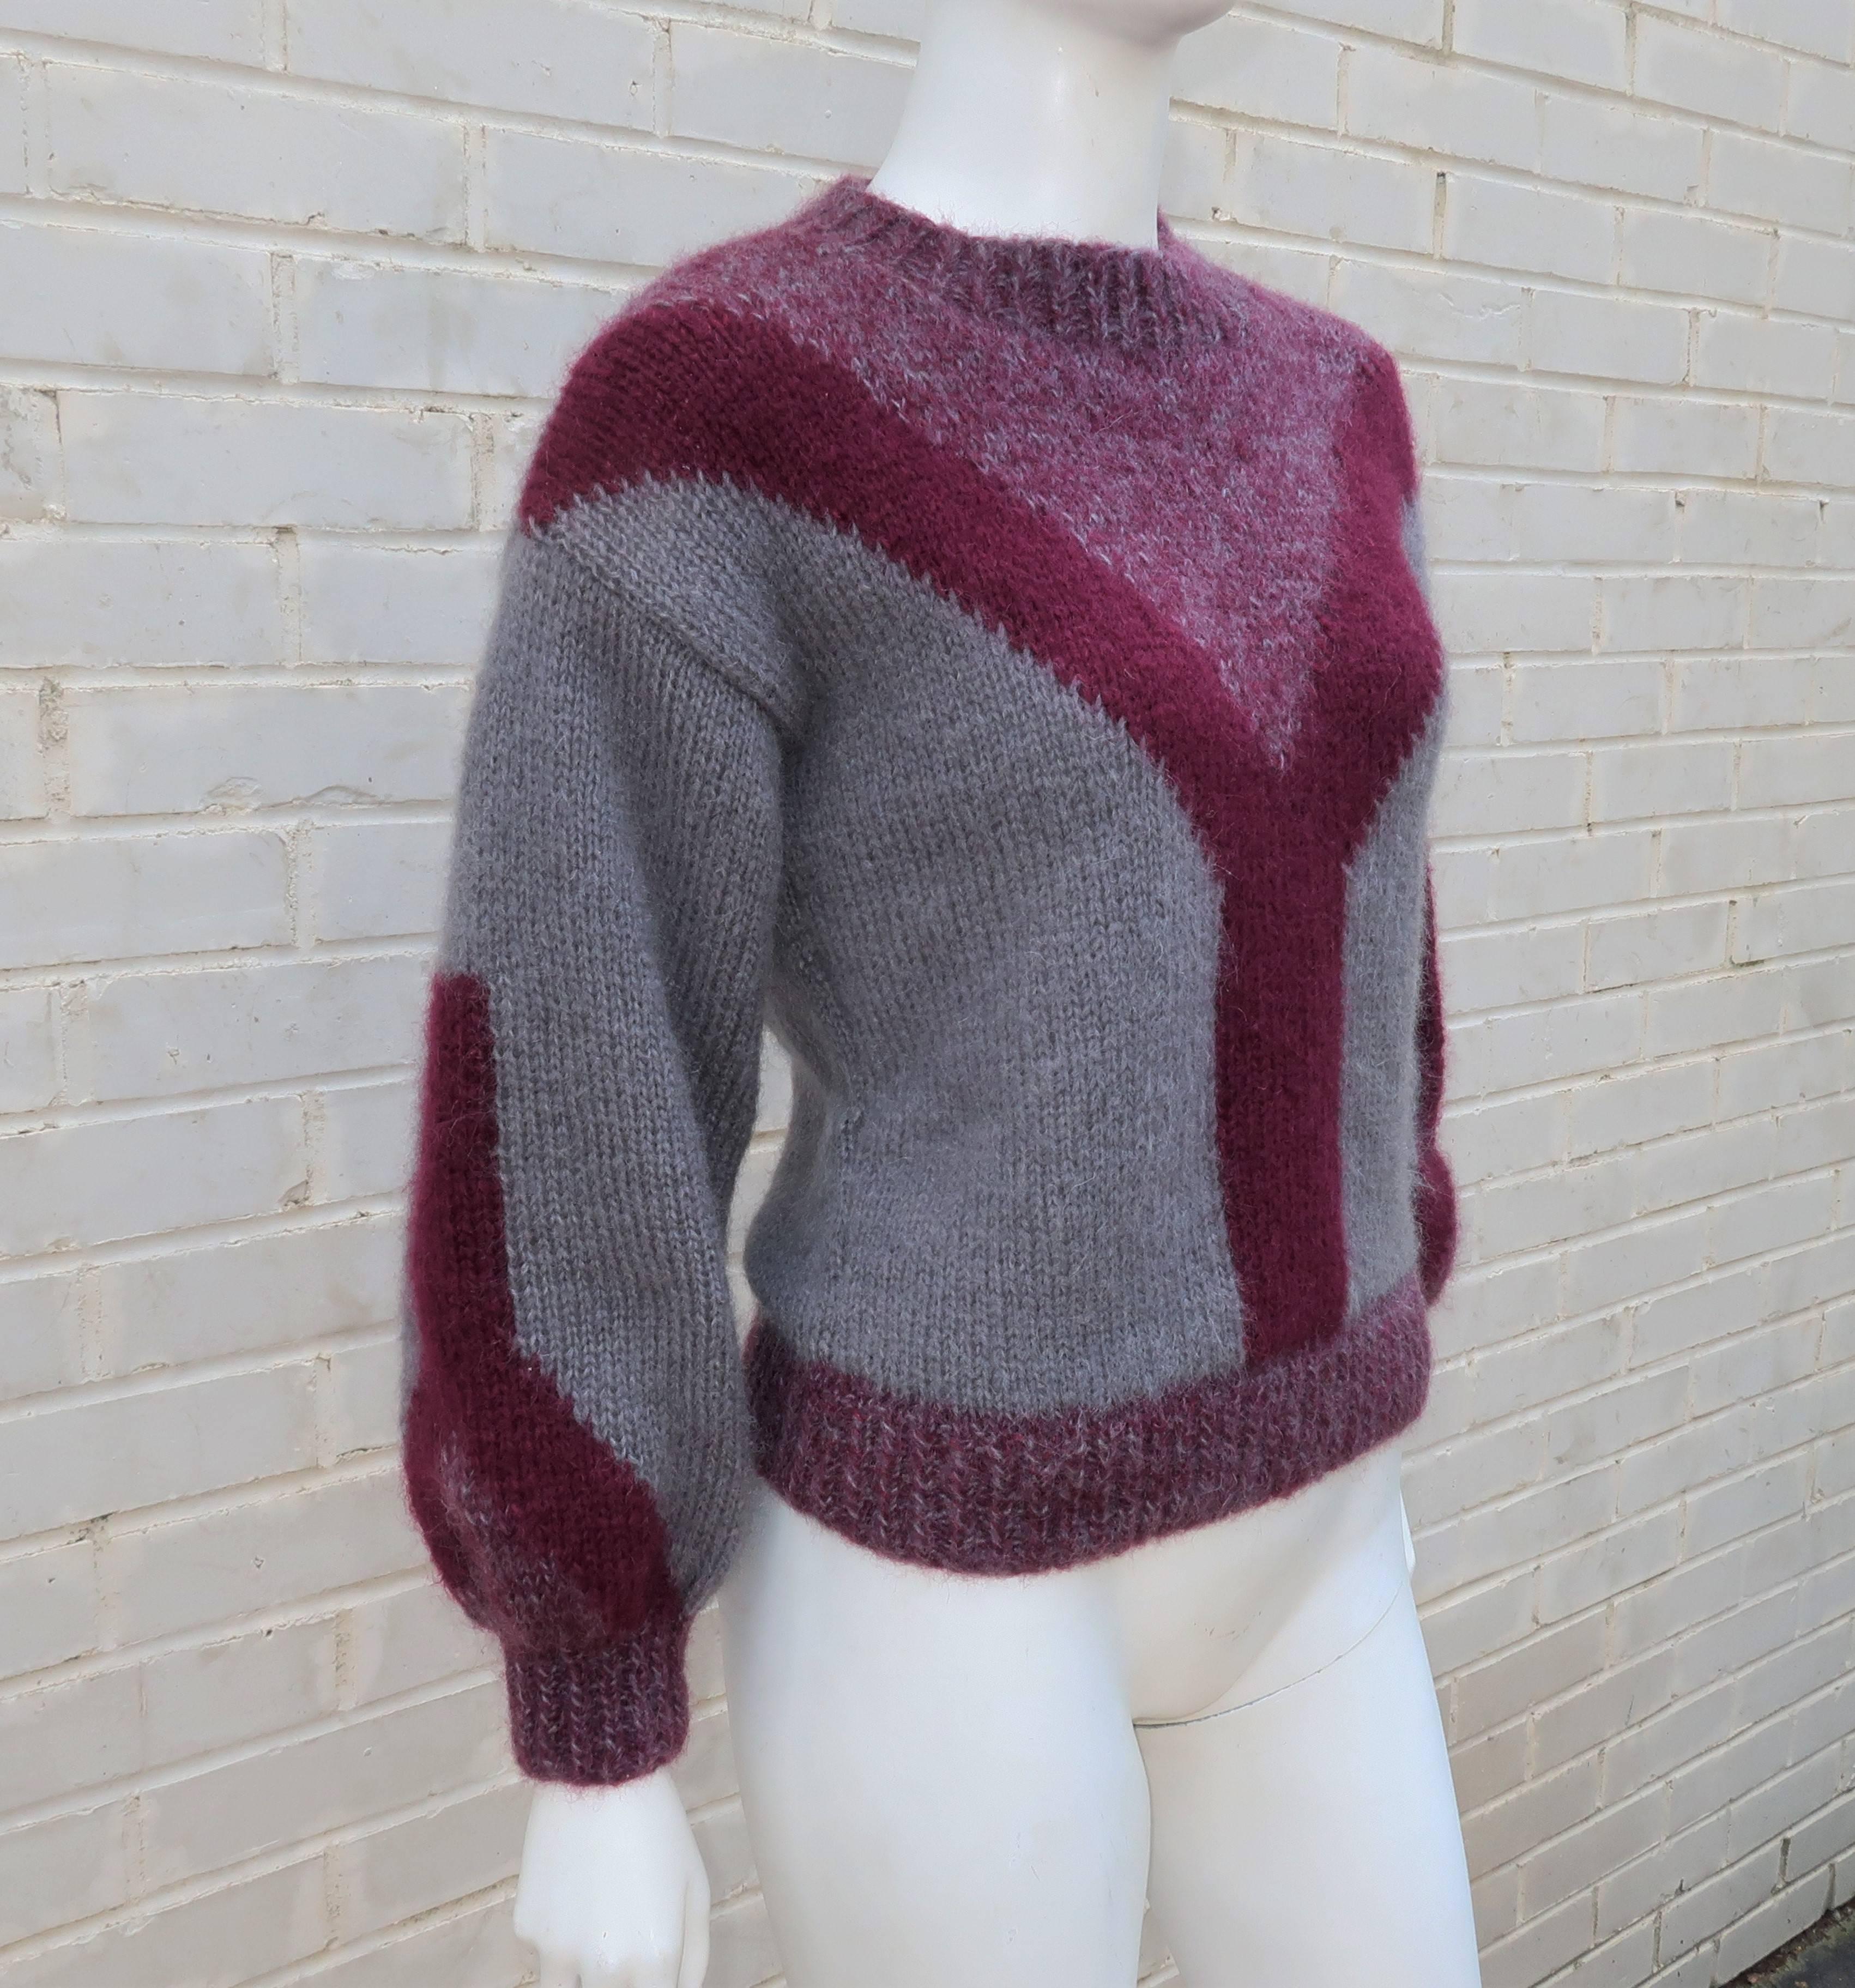 Chunky, cozy & casual!  This 1970's pullover sweater has the hallmarks of a vintage football sweater with a 'Y' shaped design created by color blocking a bluish gray and deep burgundy plum mohair wool across the front and on the sleeves.  There